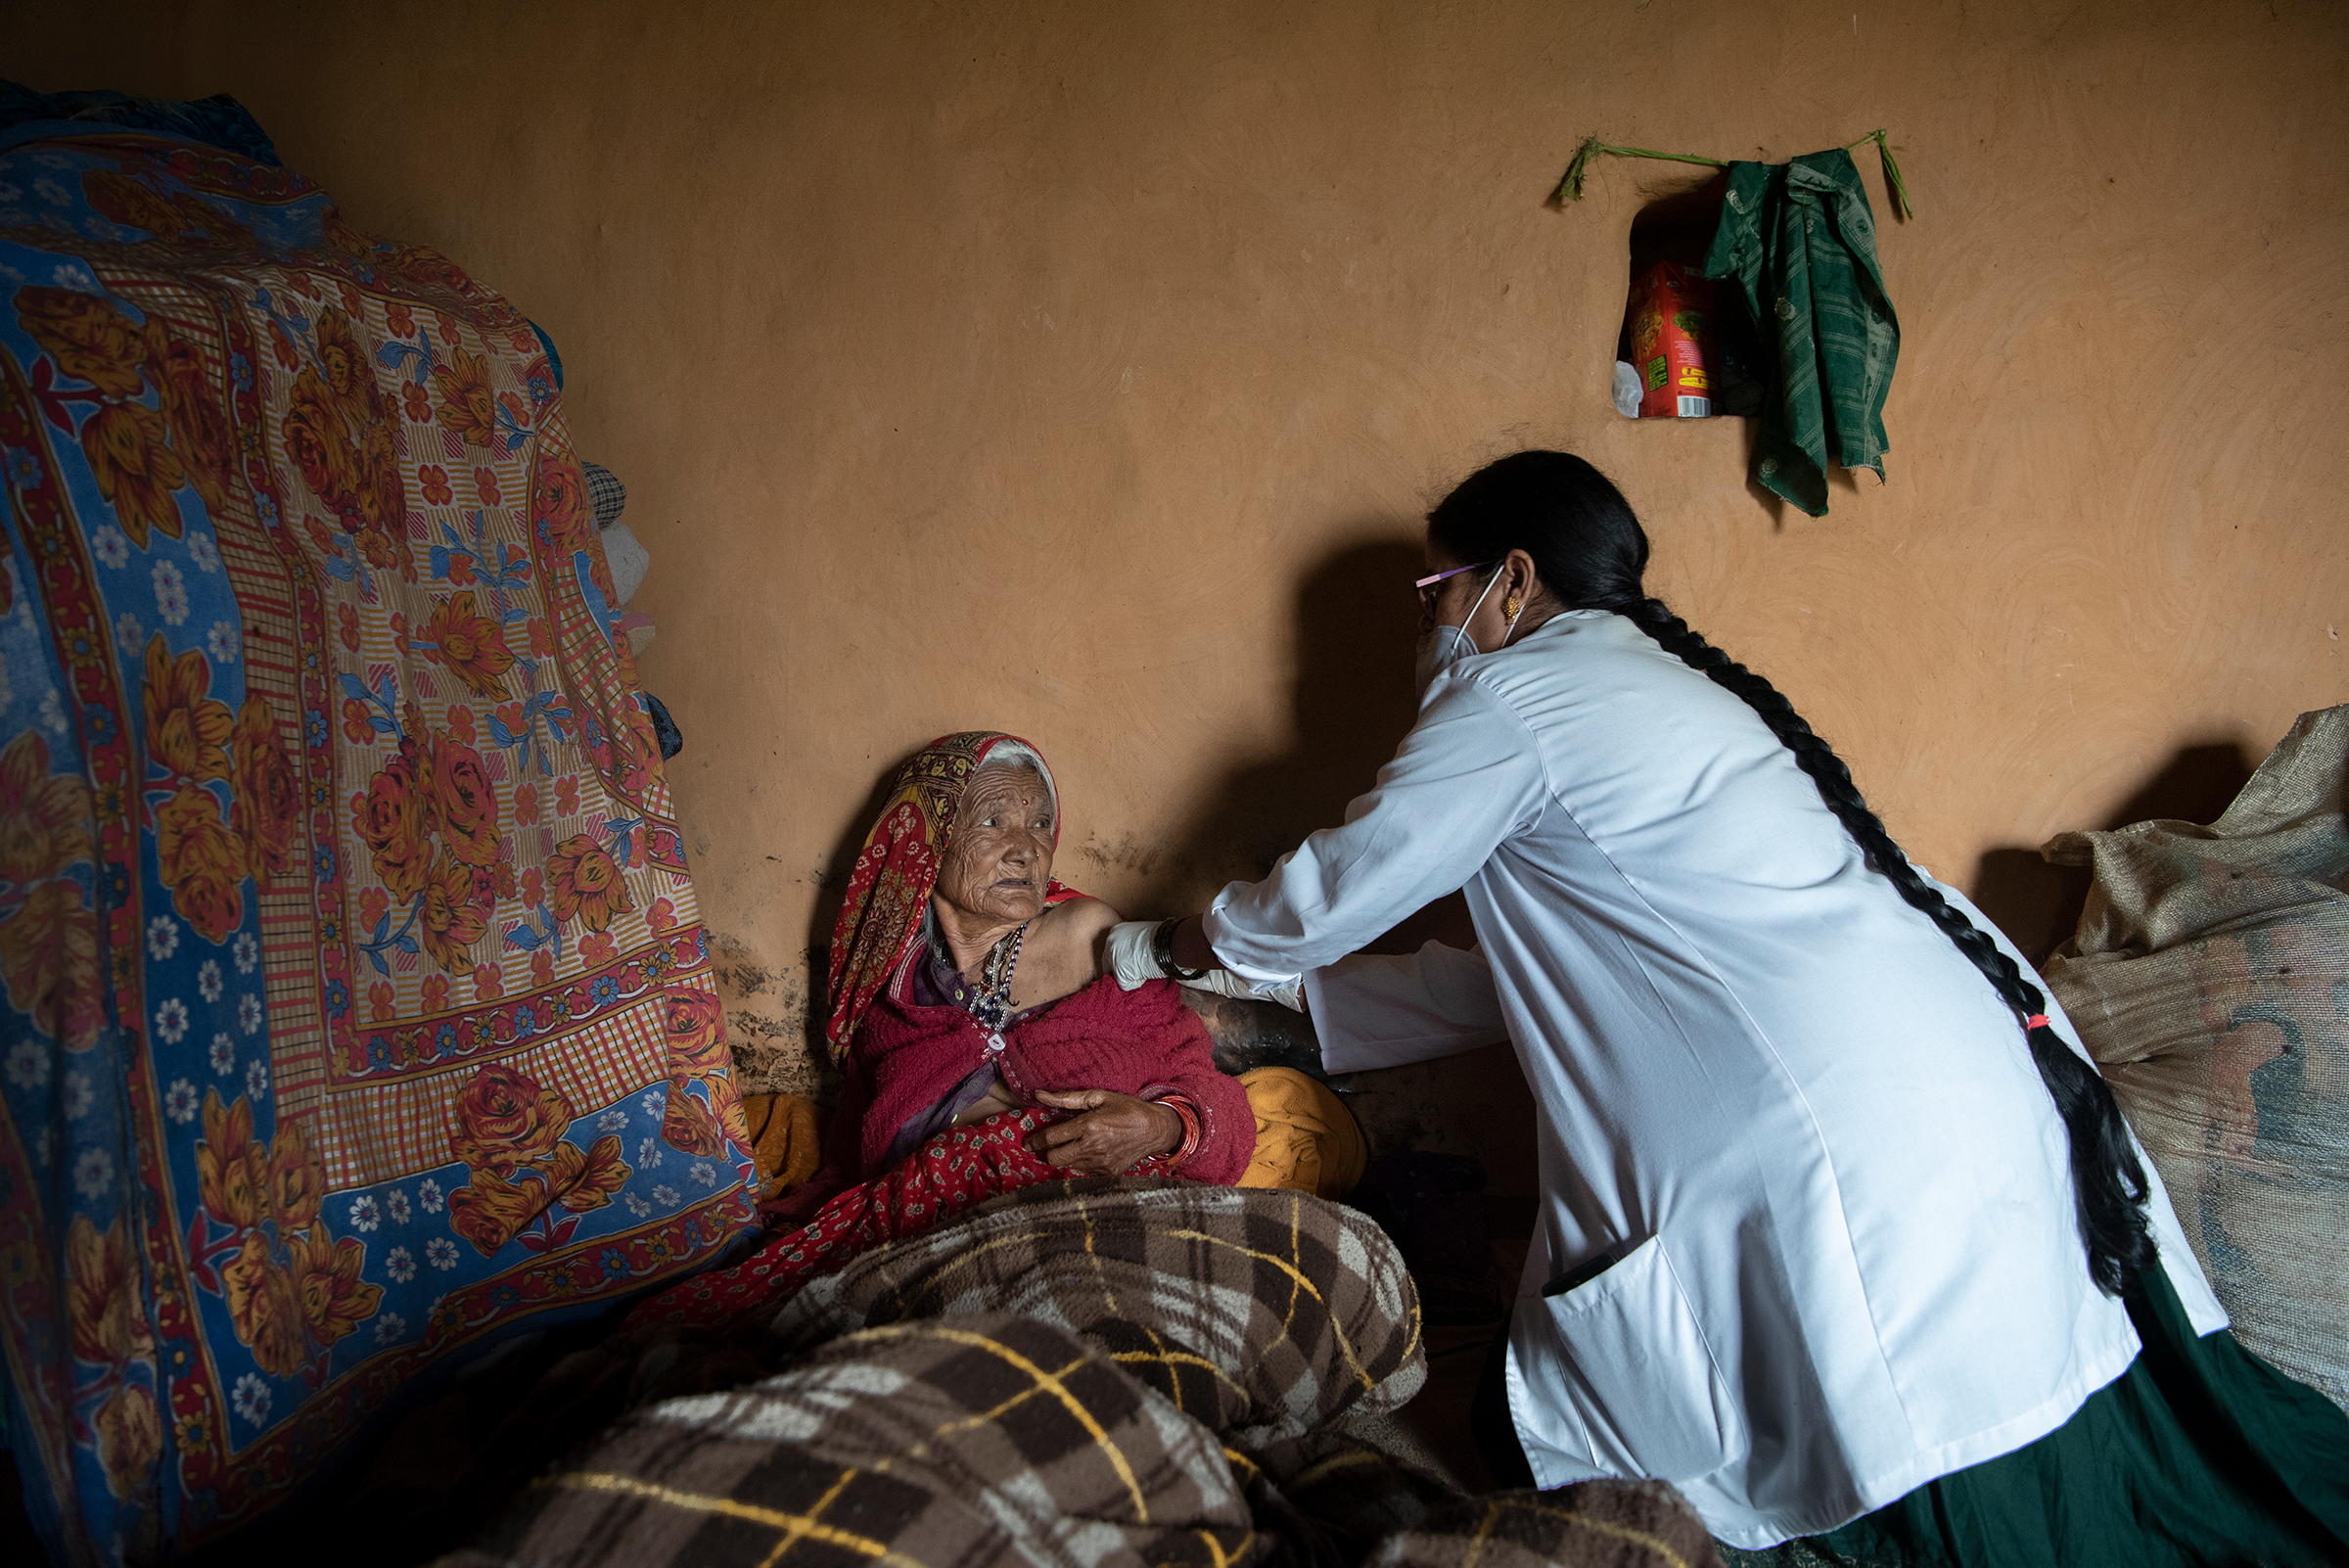 Gokuli Devi, 80, receives a vaccine at her home near Aghariya, India, on Sept. 4 because she is too frail to walk to a local site